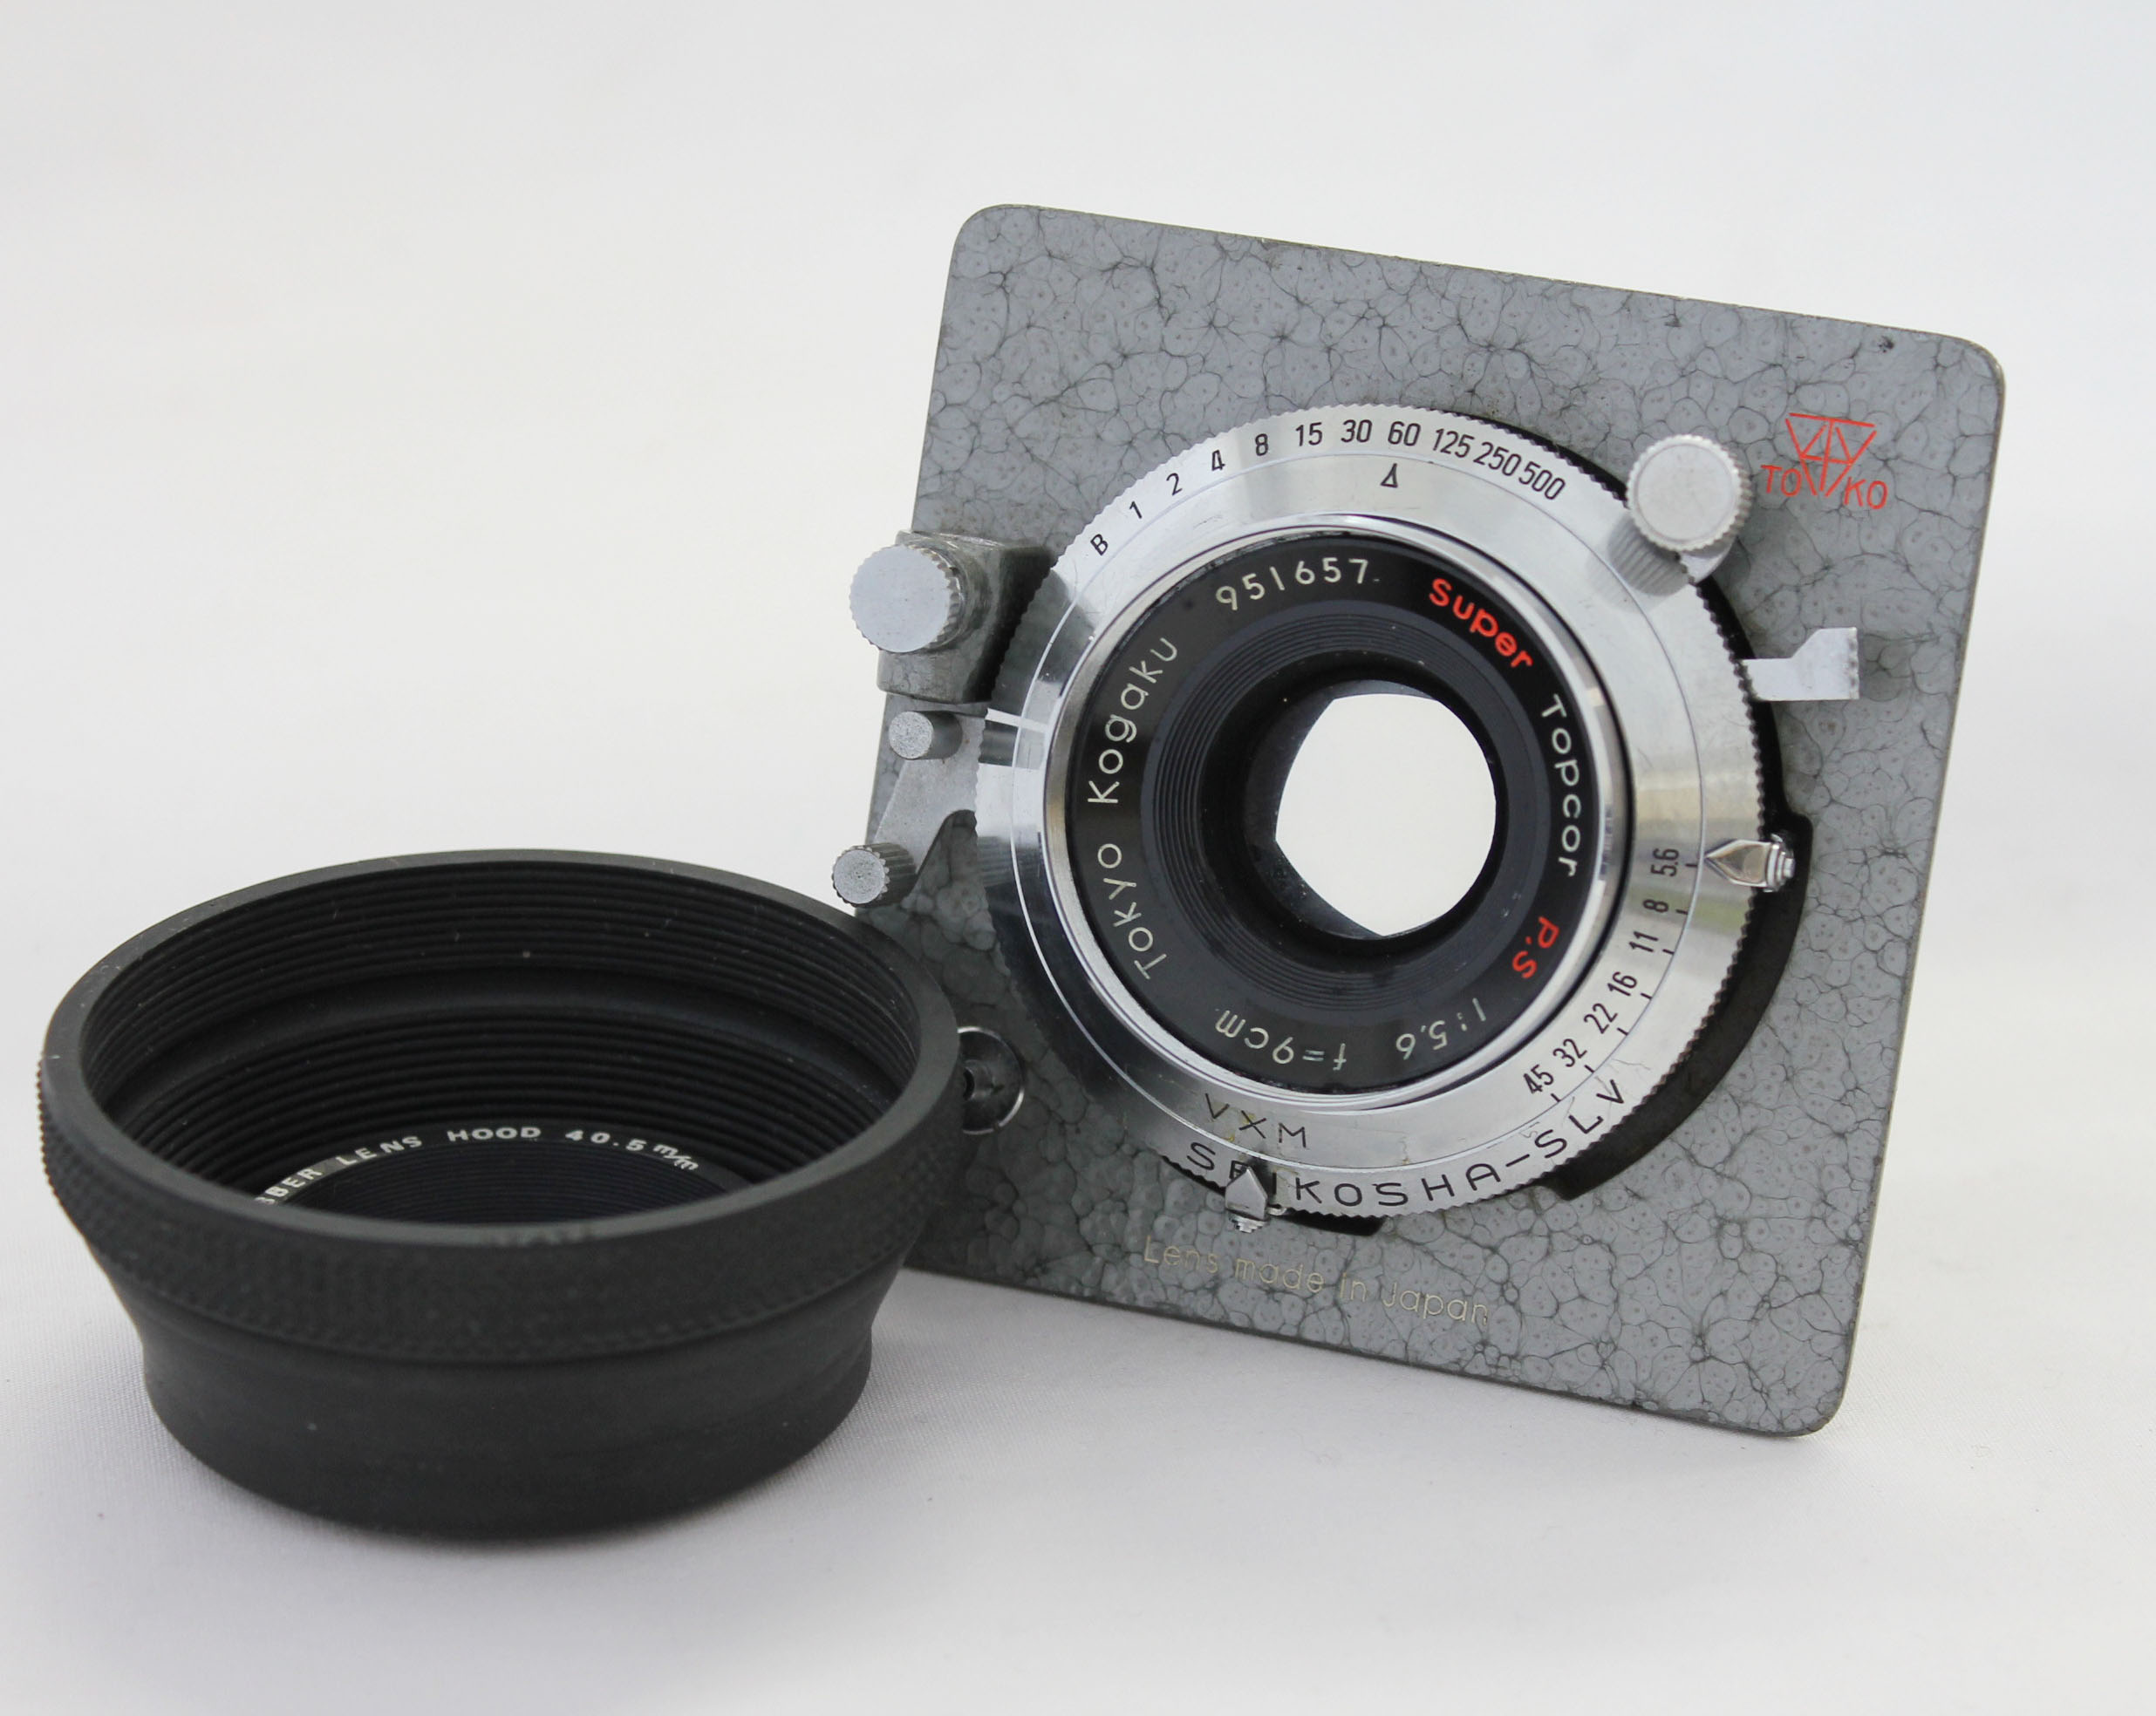 Japan Used Camera Shop | Super Topcor PS 9cm 90mm F/5.6 Seiko Shutter Horseman Board with Rubber Lens Food from Japan